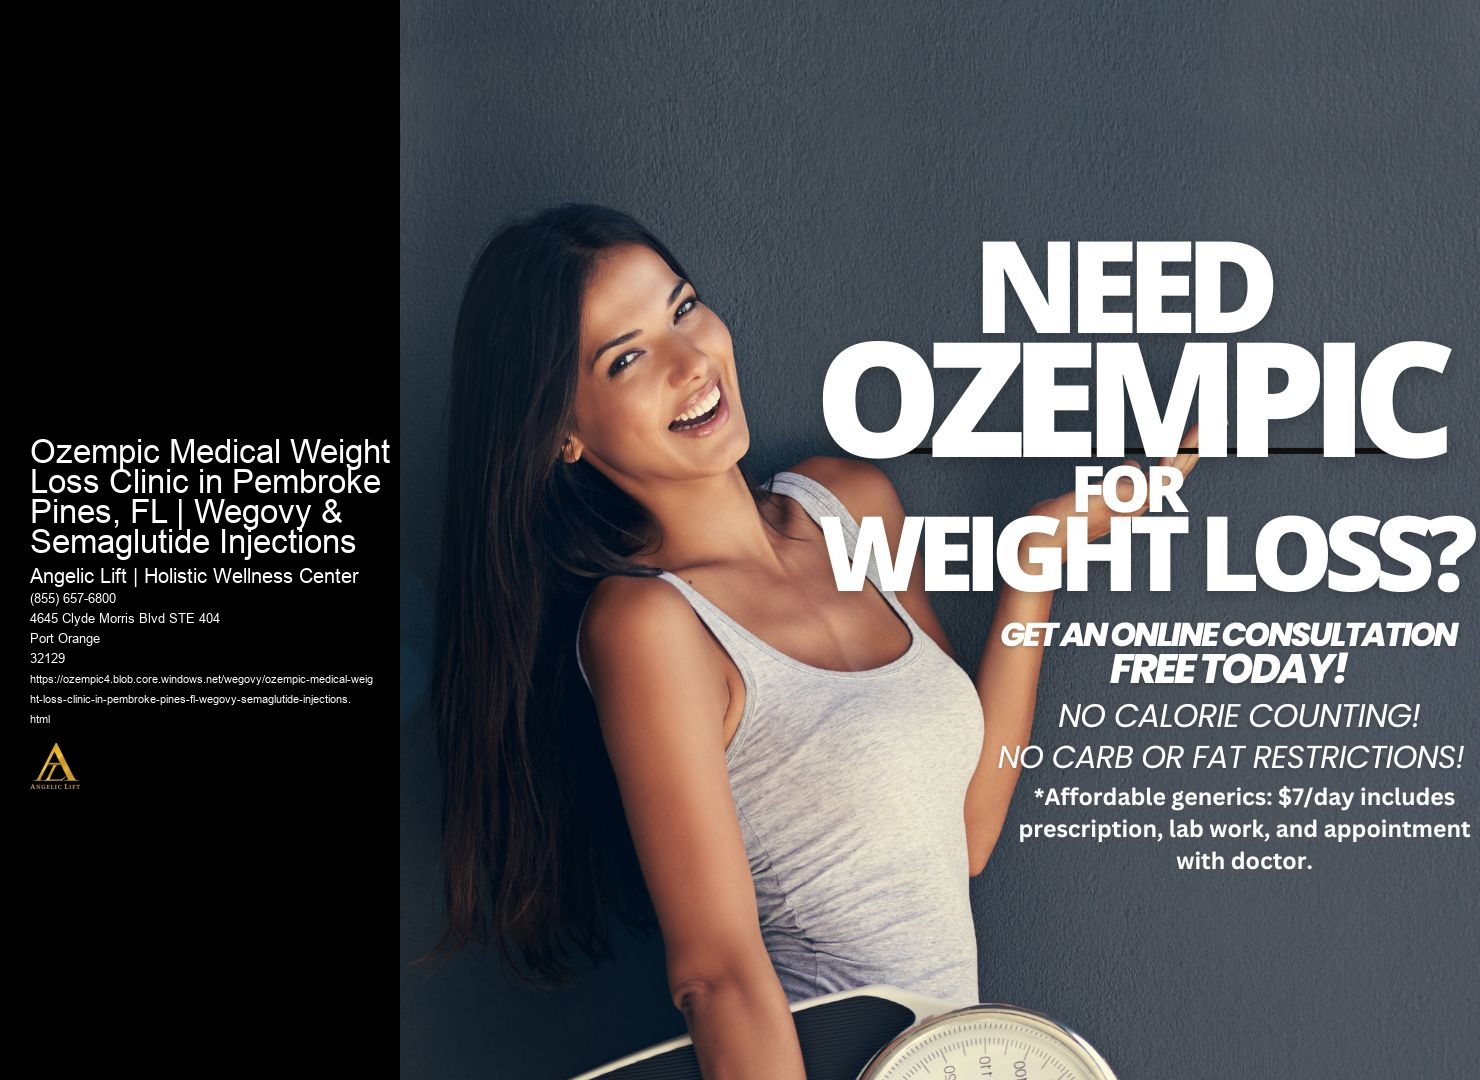 Ozempic Medical Weight Loss Clinic in Pembroke Pines, FL | Wegovy & Semaglutide Injections